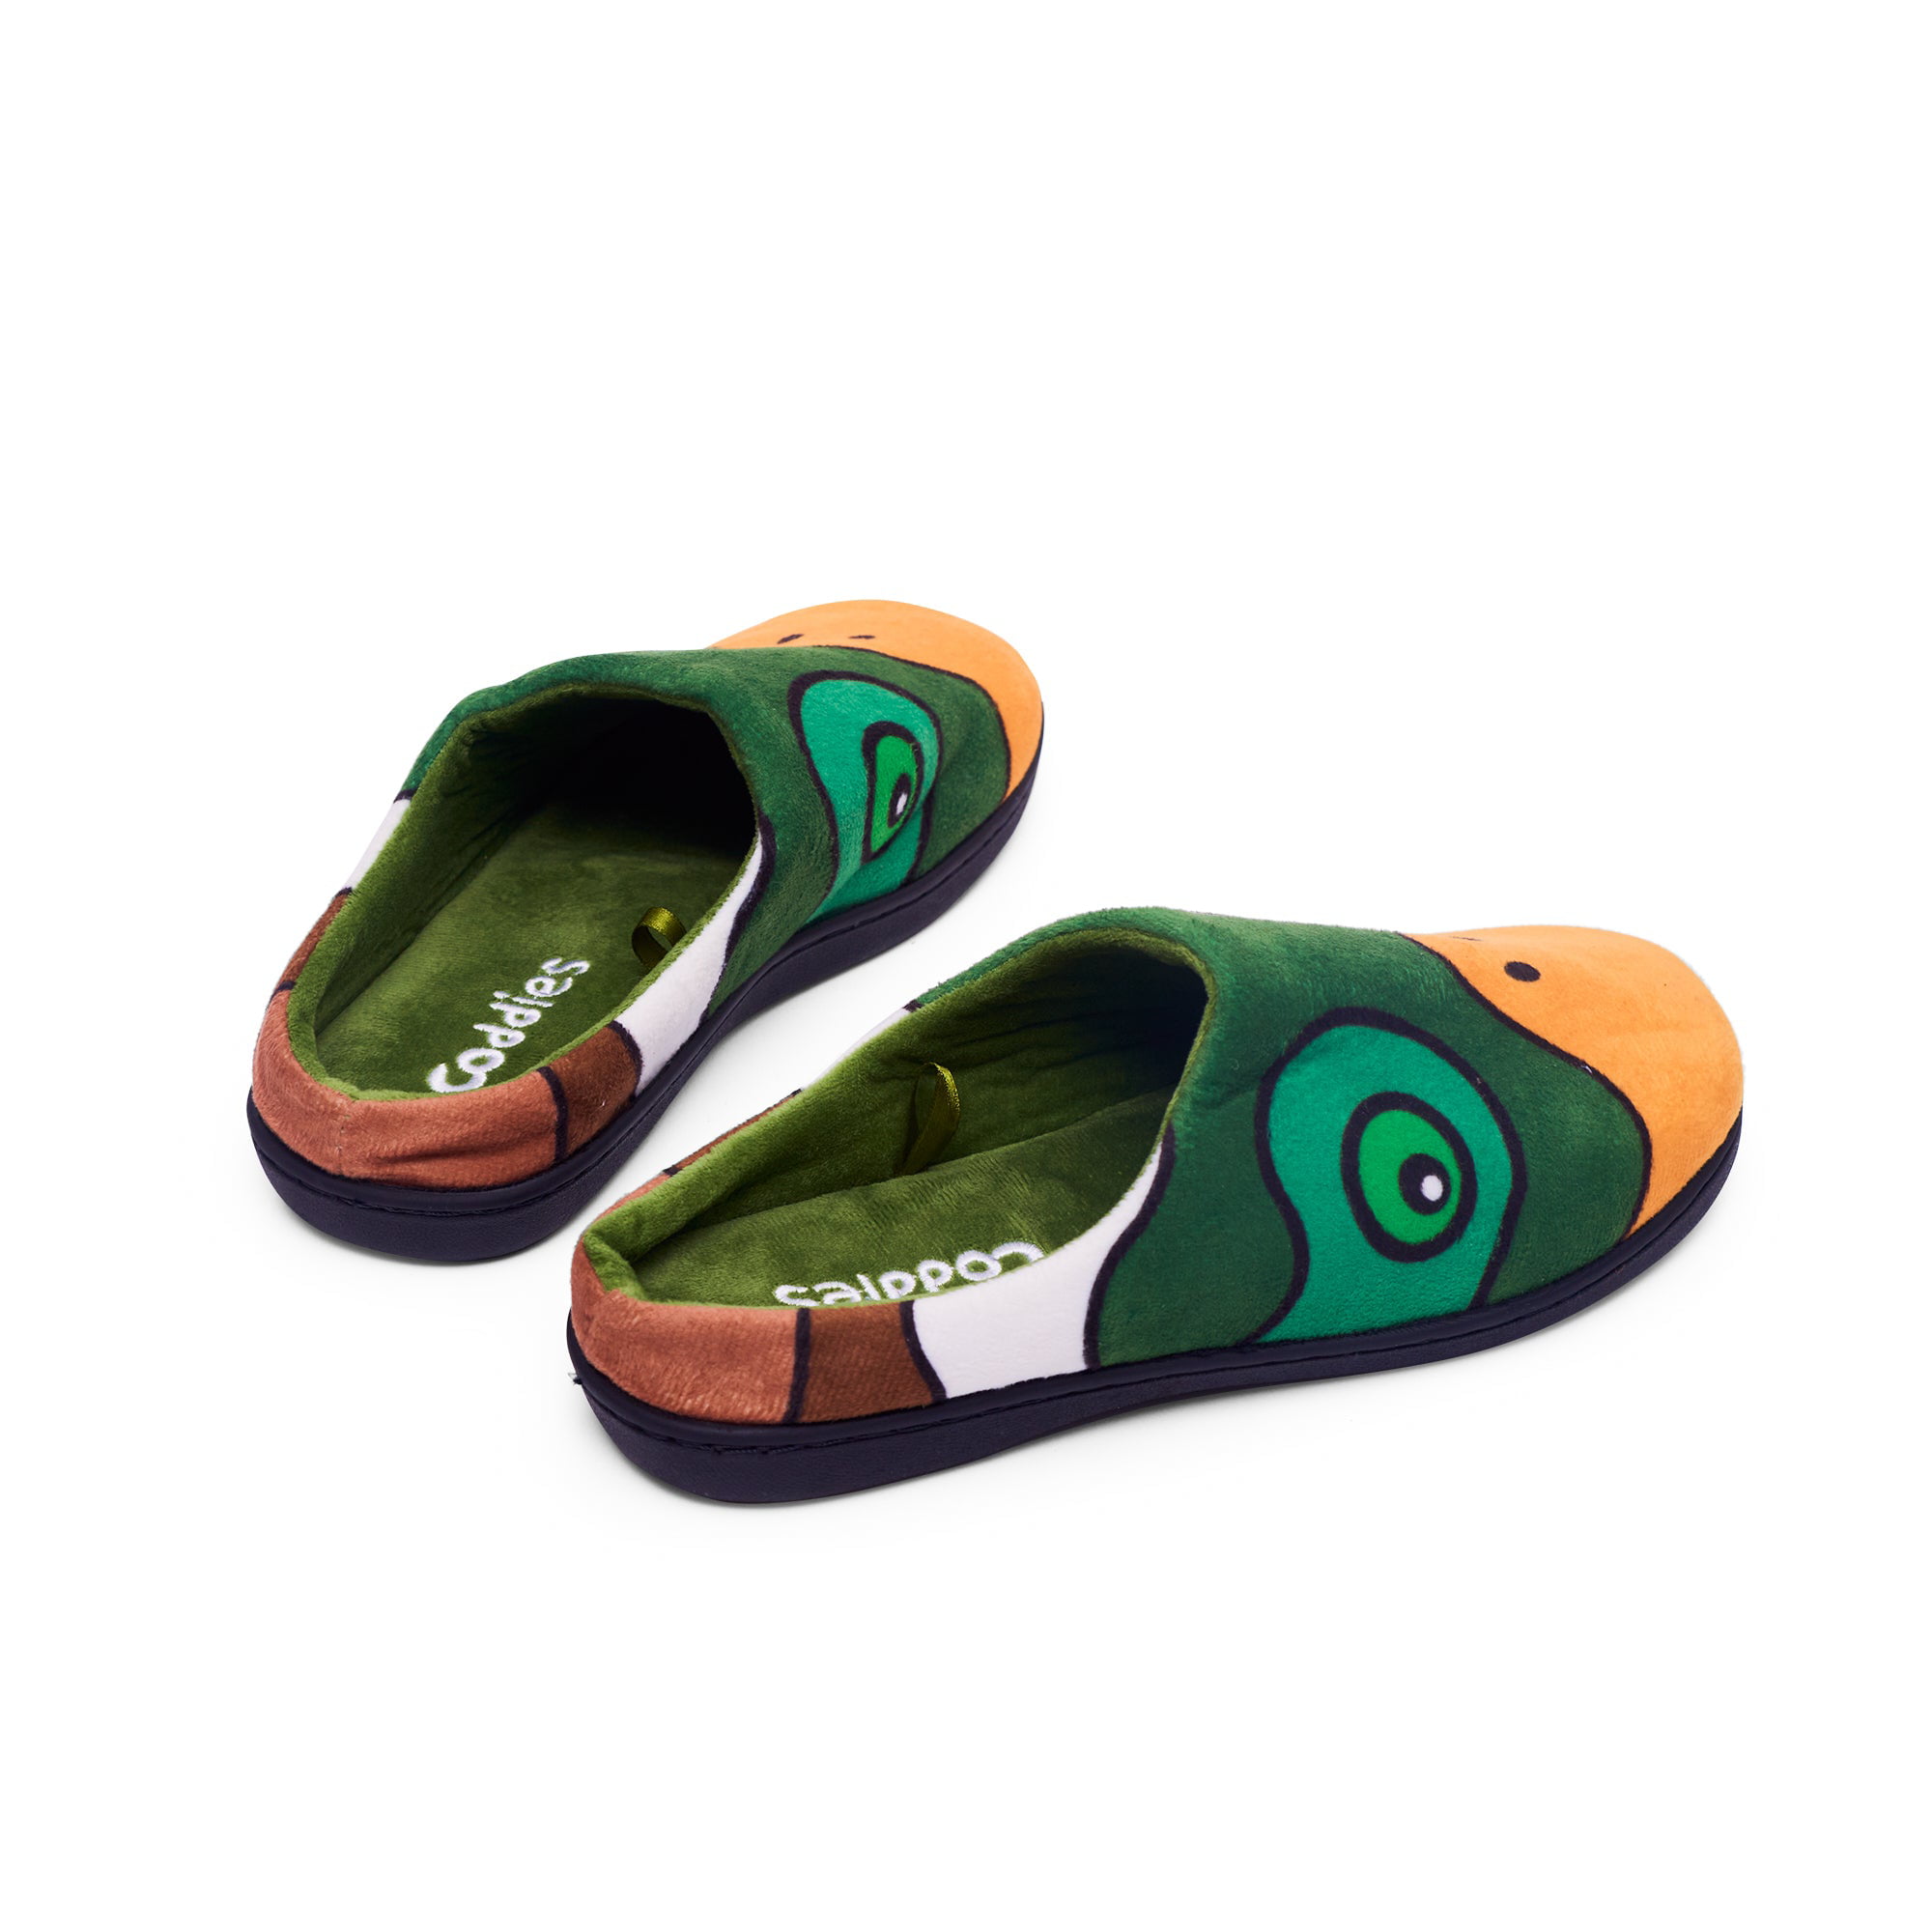 Coddies Sushi “Shoe-shi” Slippers, Novelty Shoes for Indoor & Outdoor Use, Ultimate Gift (4-7.5 Men